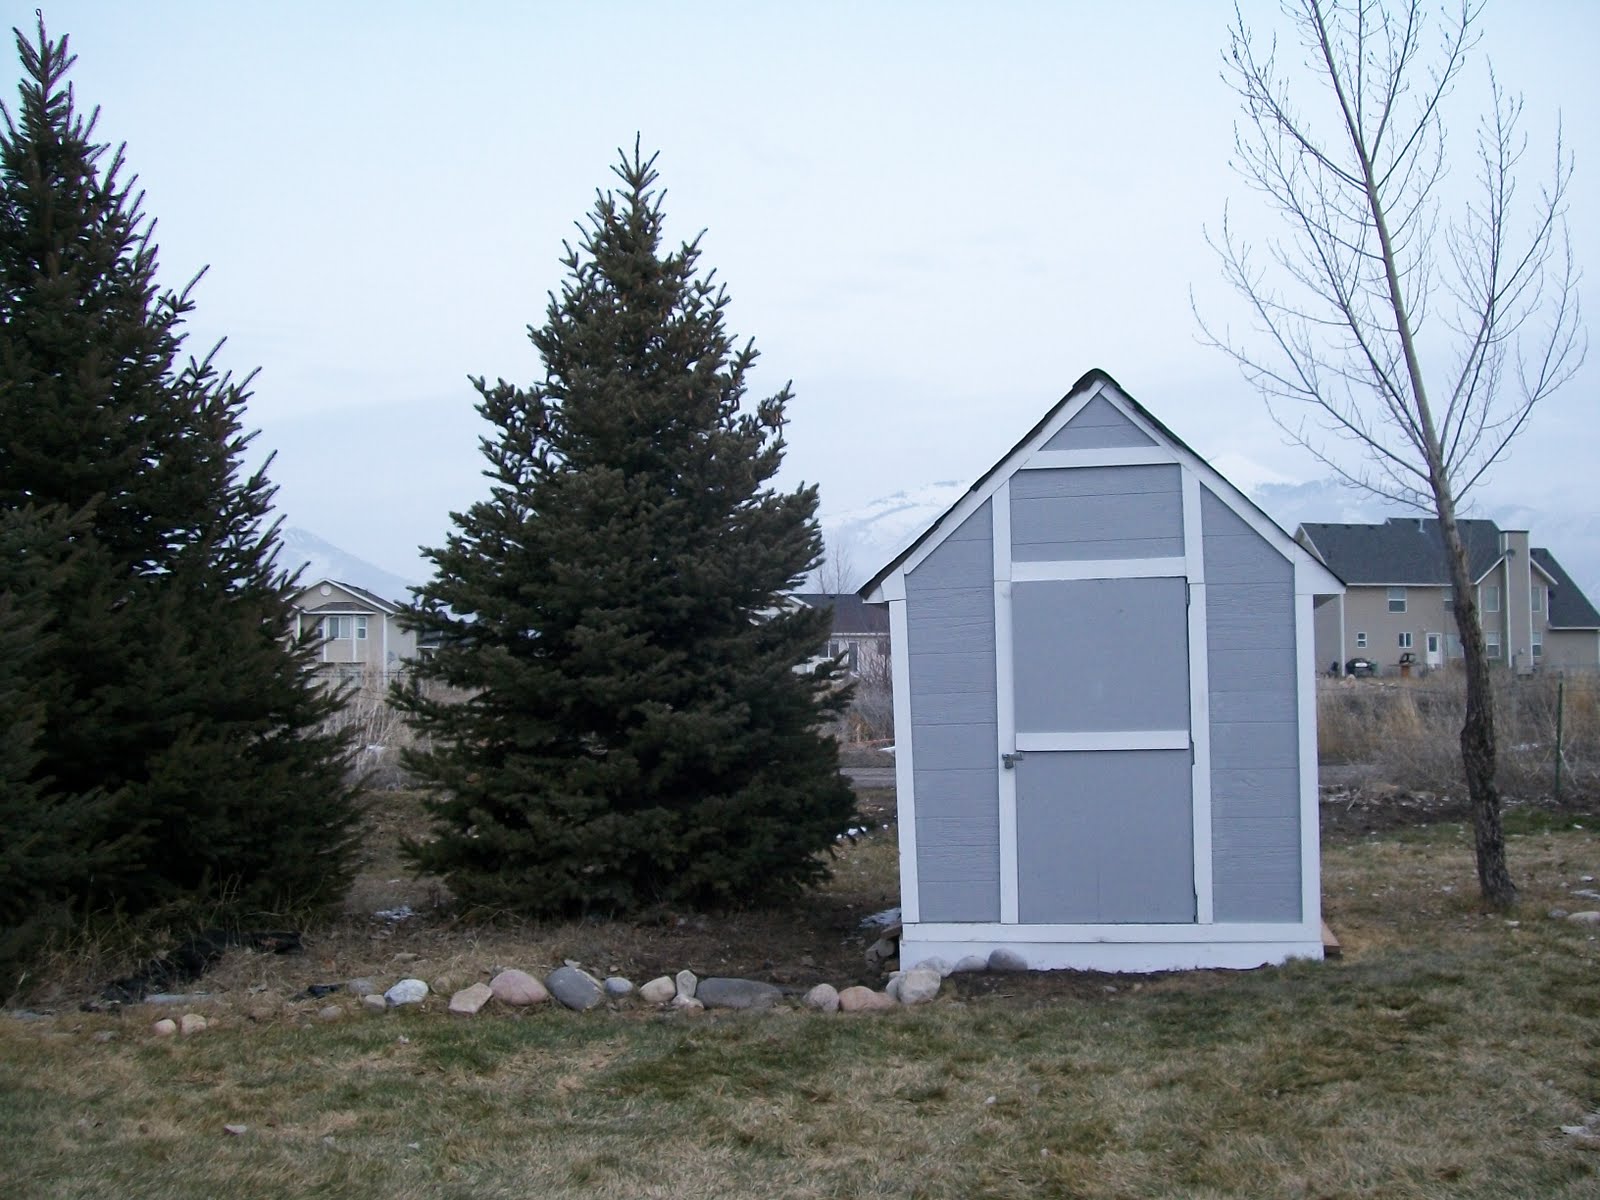 For Sale: 6x8' Storage Shed/Play House and Back Yard